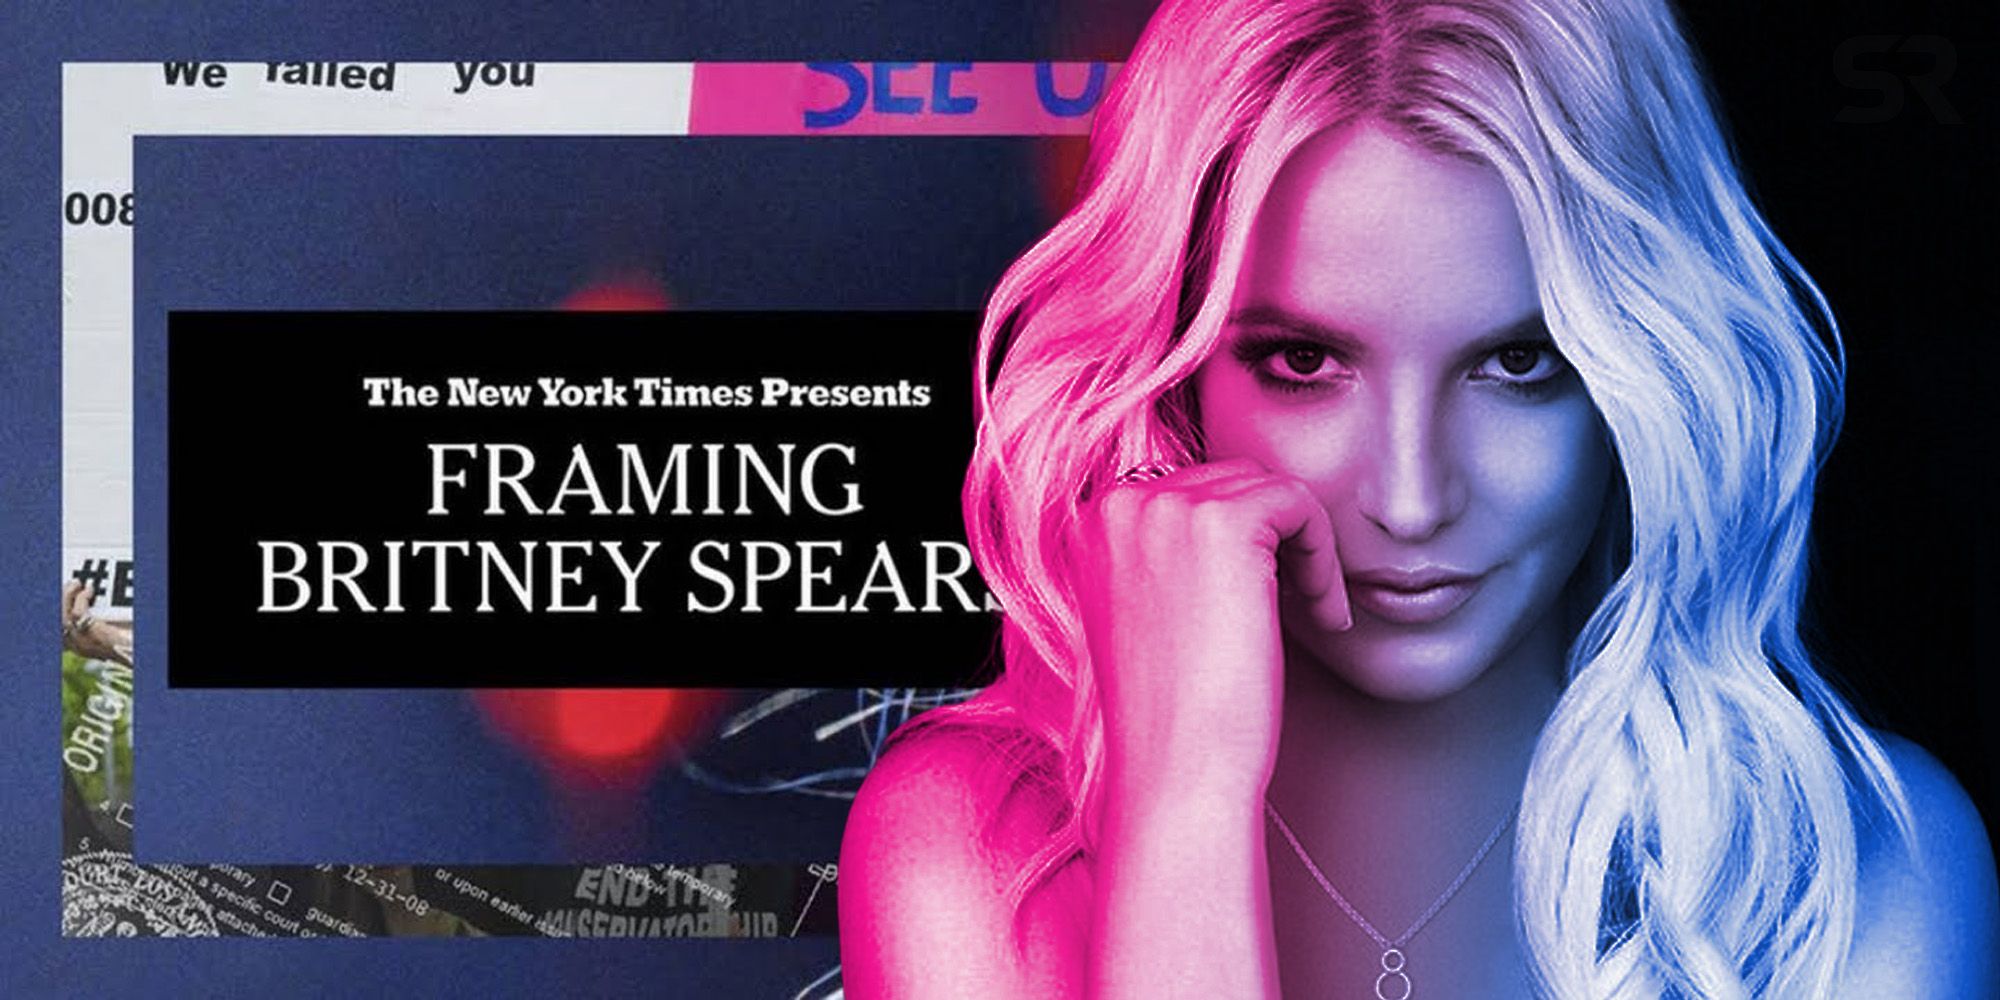 Framing Britney Spears / Raf Simons Womenswear Is Here - SolidRumor.com - Stream framing britney spears online on 123movies and 123movieshub.